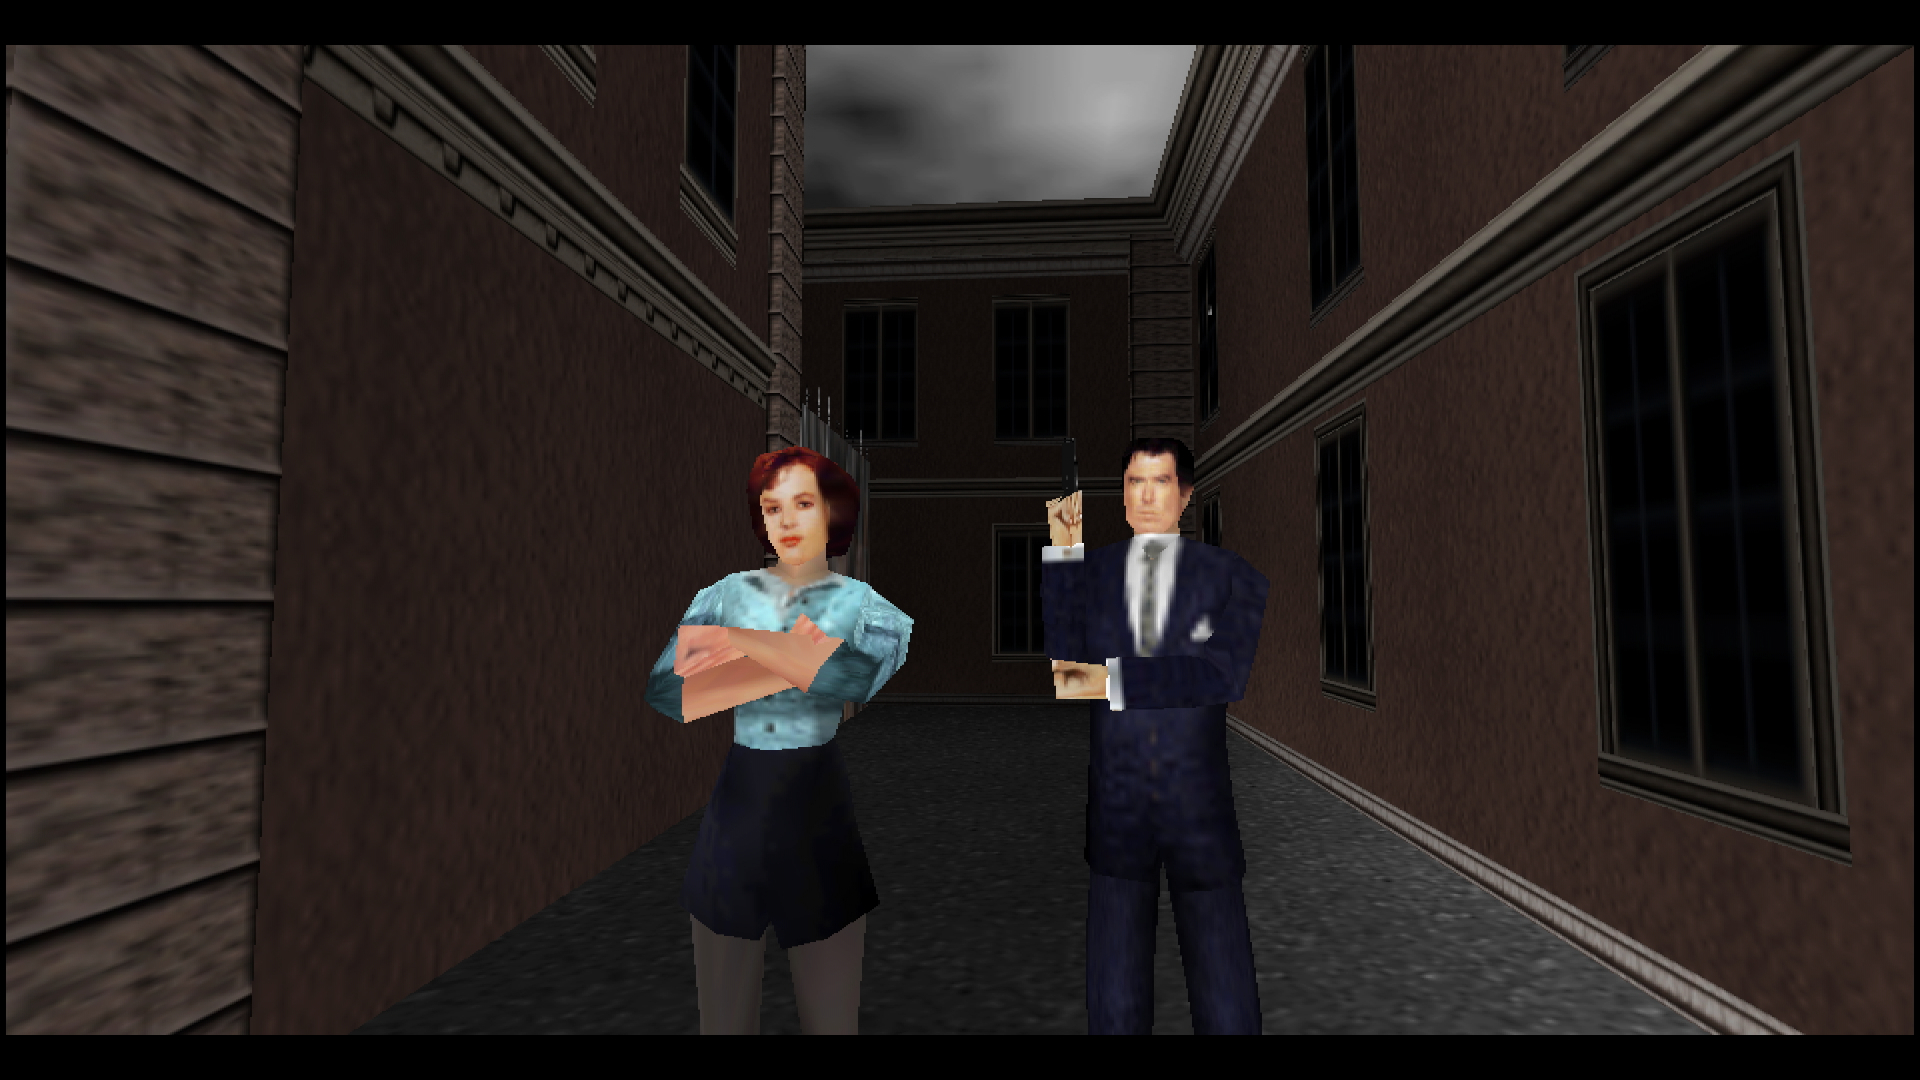 Nintendo News: Countdown to 007! GoldenEye 007 Shakes Up the Action for Nintendo Online + Expansion Pack on 27 | Business Wire